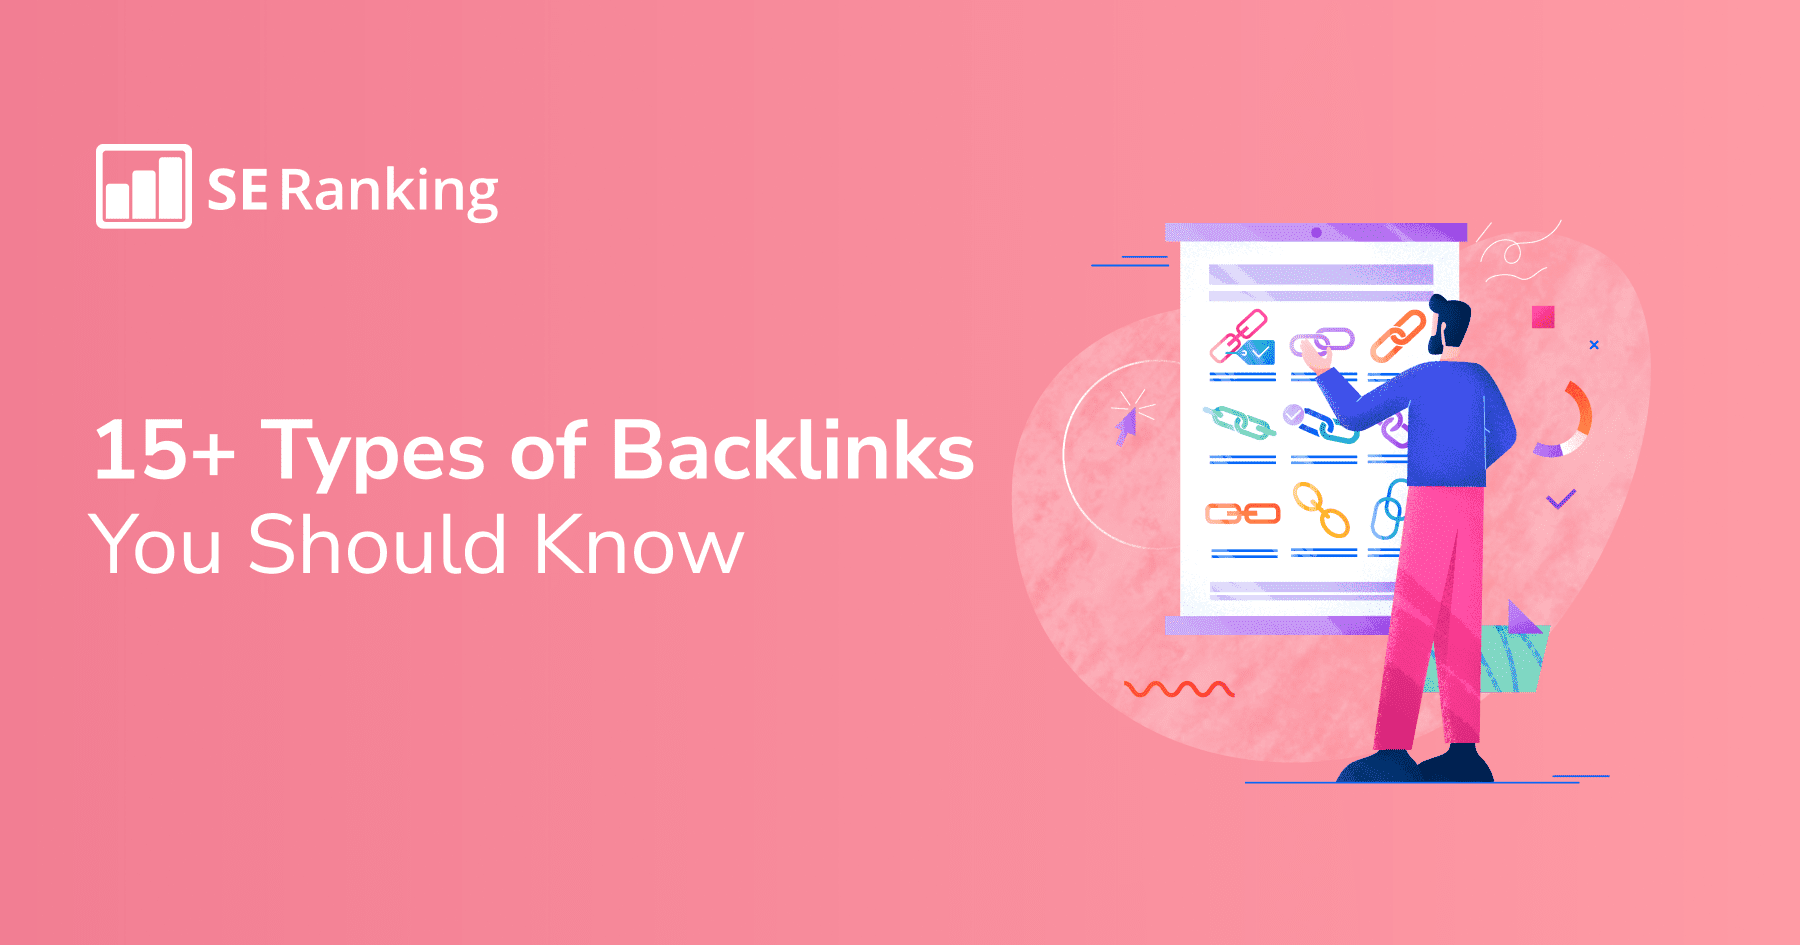 Types of Backlinks That Impact Your SEO